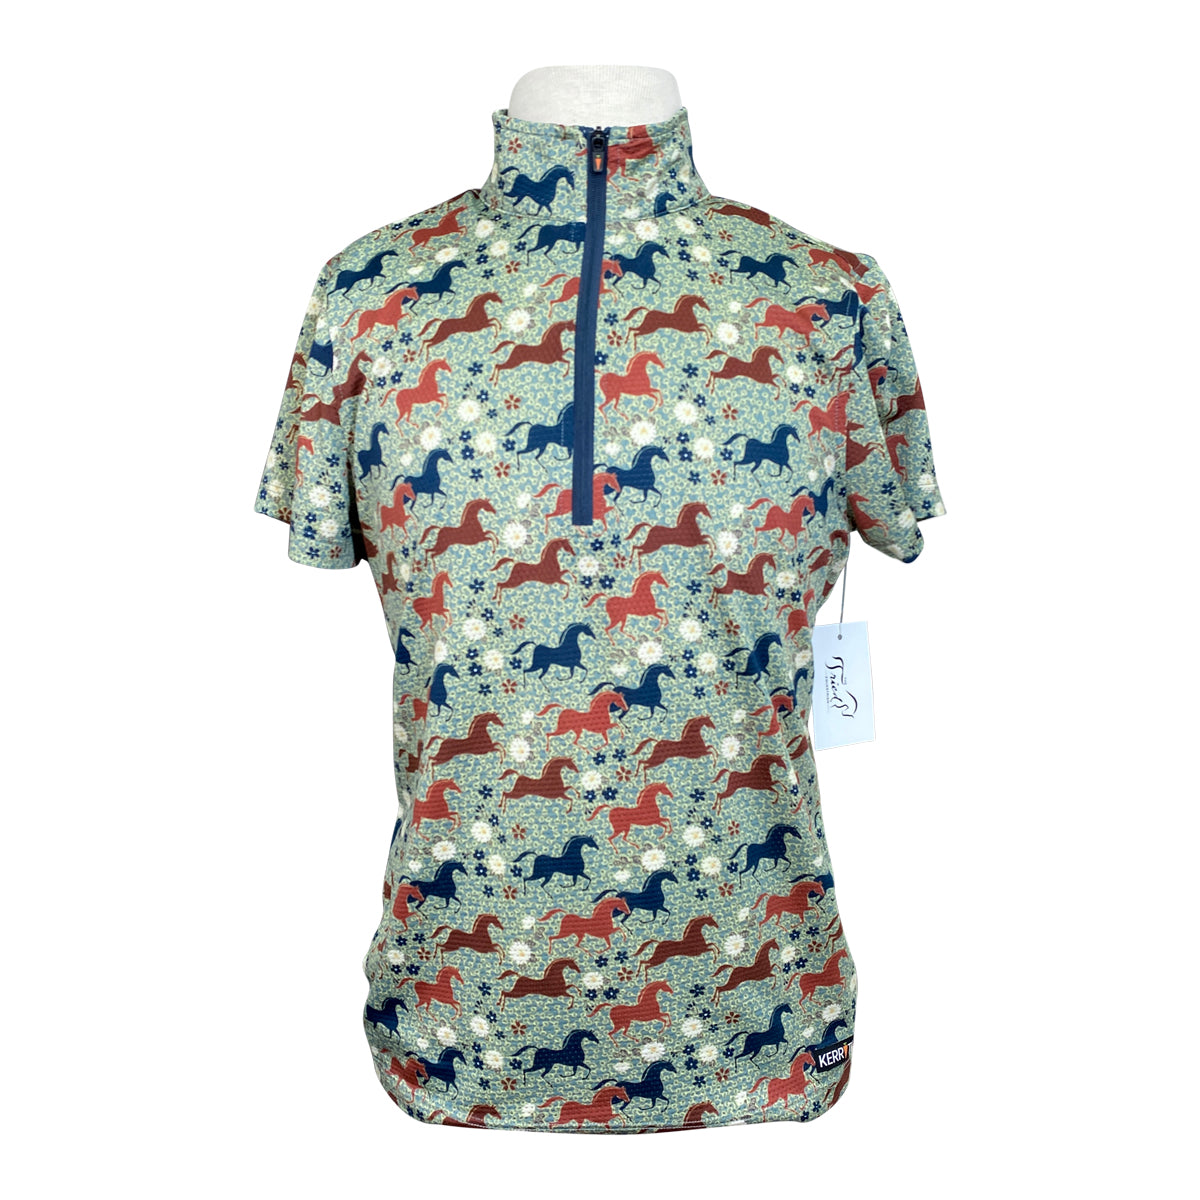 Kerrits 'Aire Ice Fil' Shirt in Green w/Floral Horses